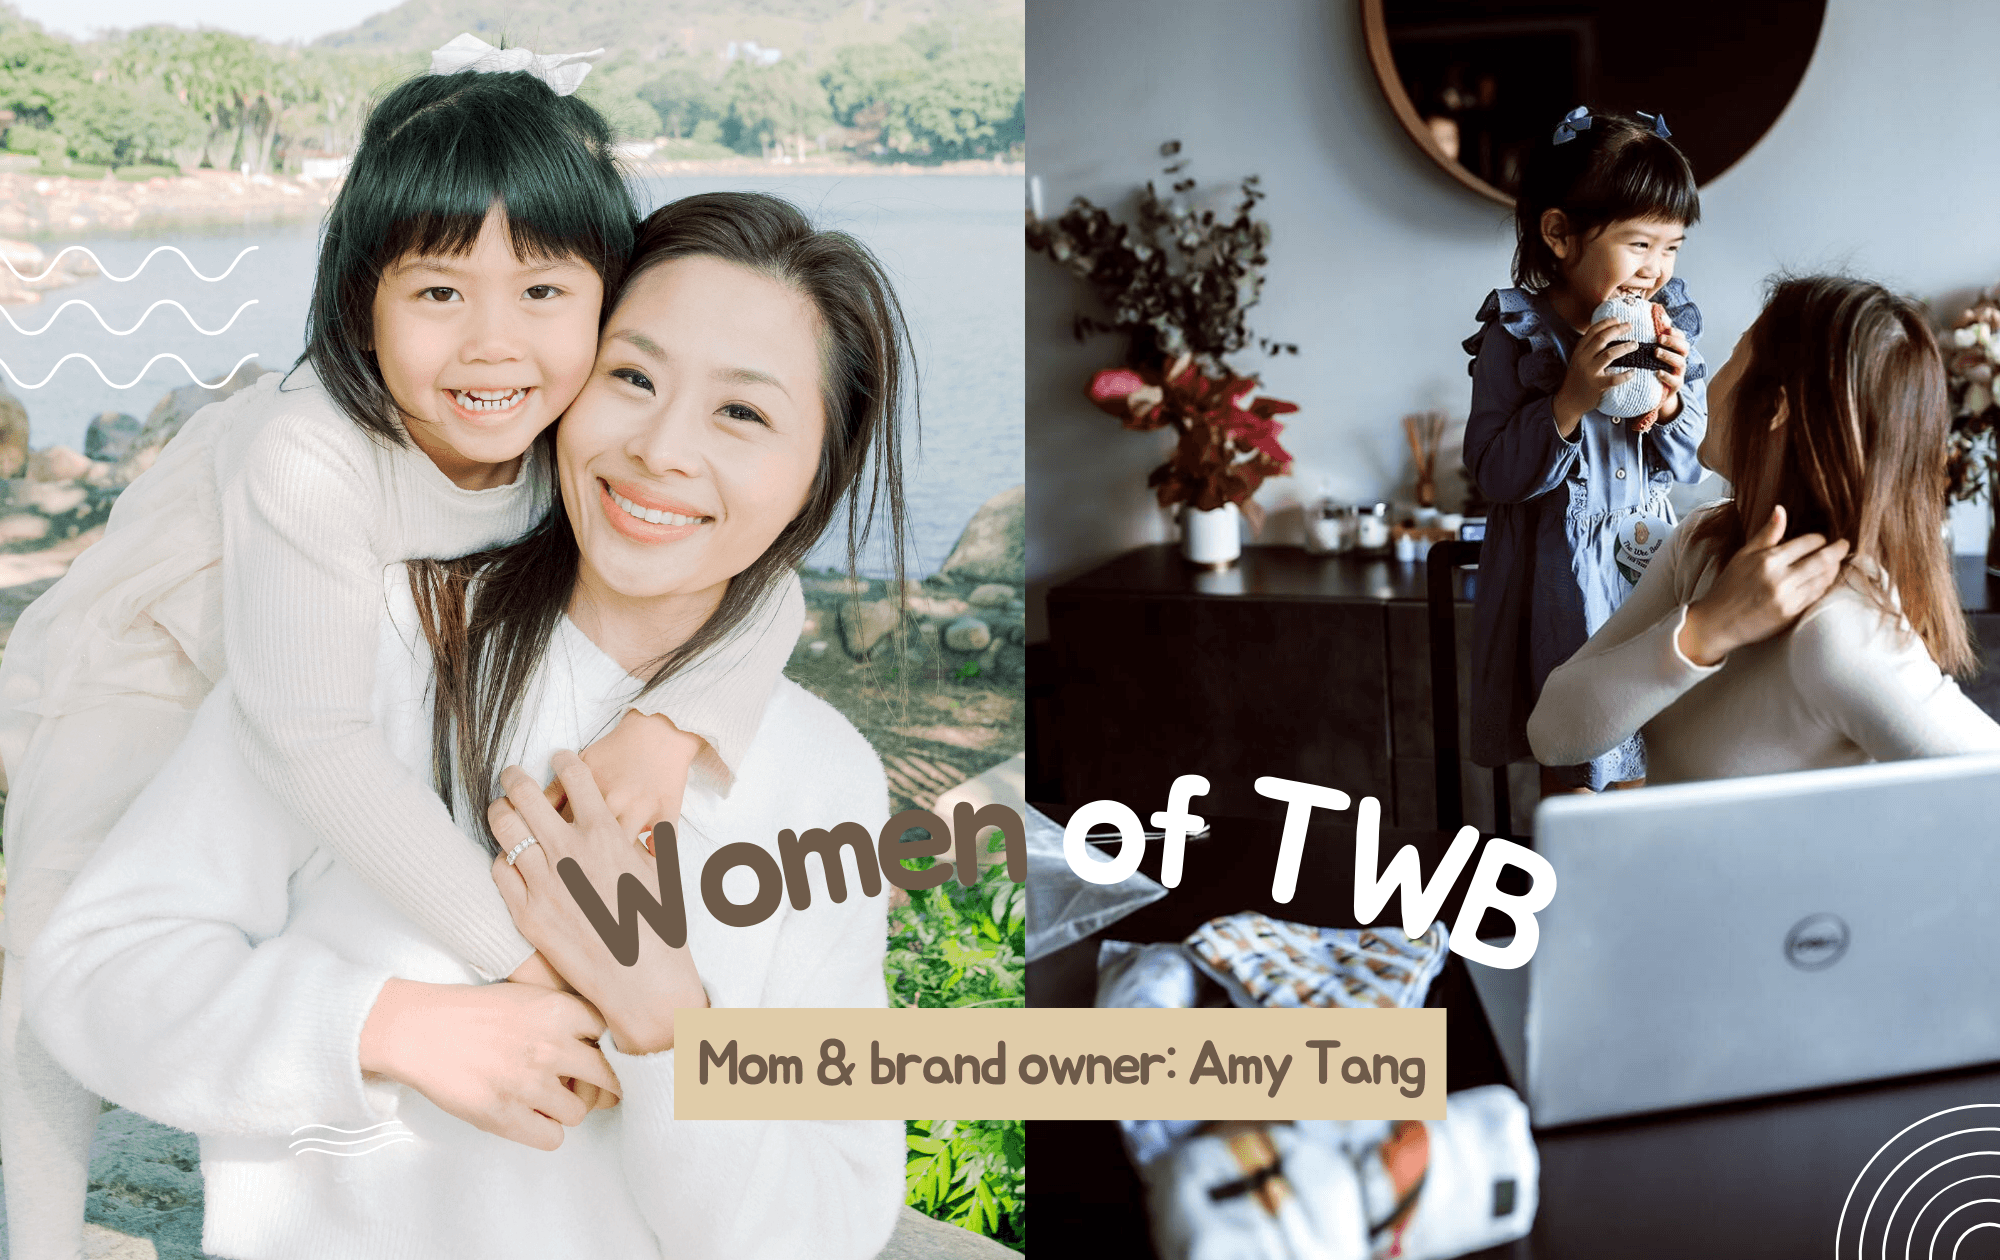 Interview with Amy Tang, co-founder of The Wee Bean